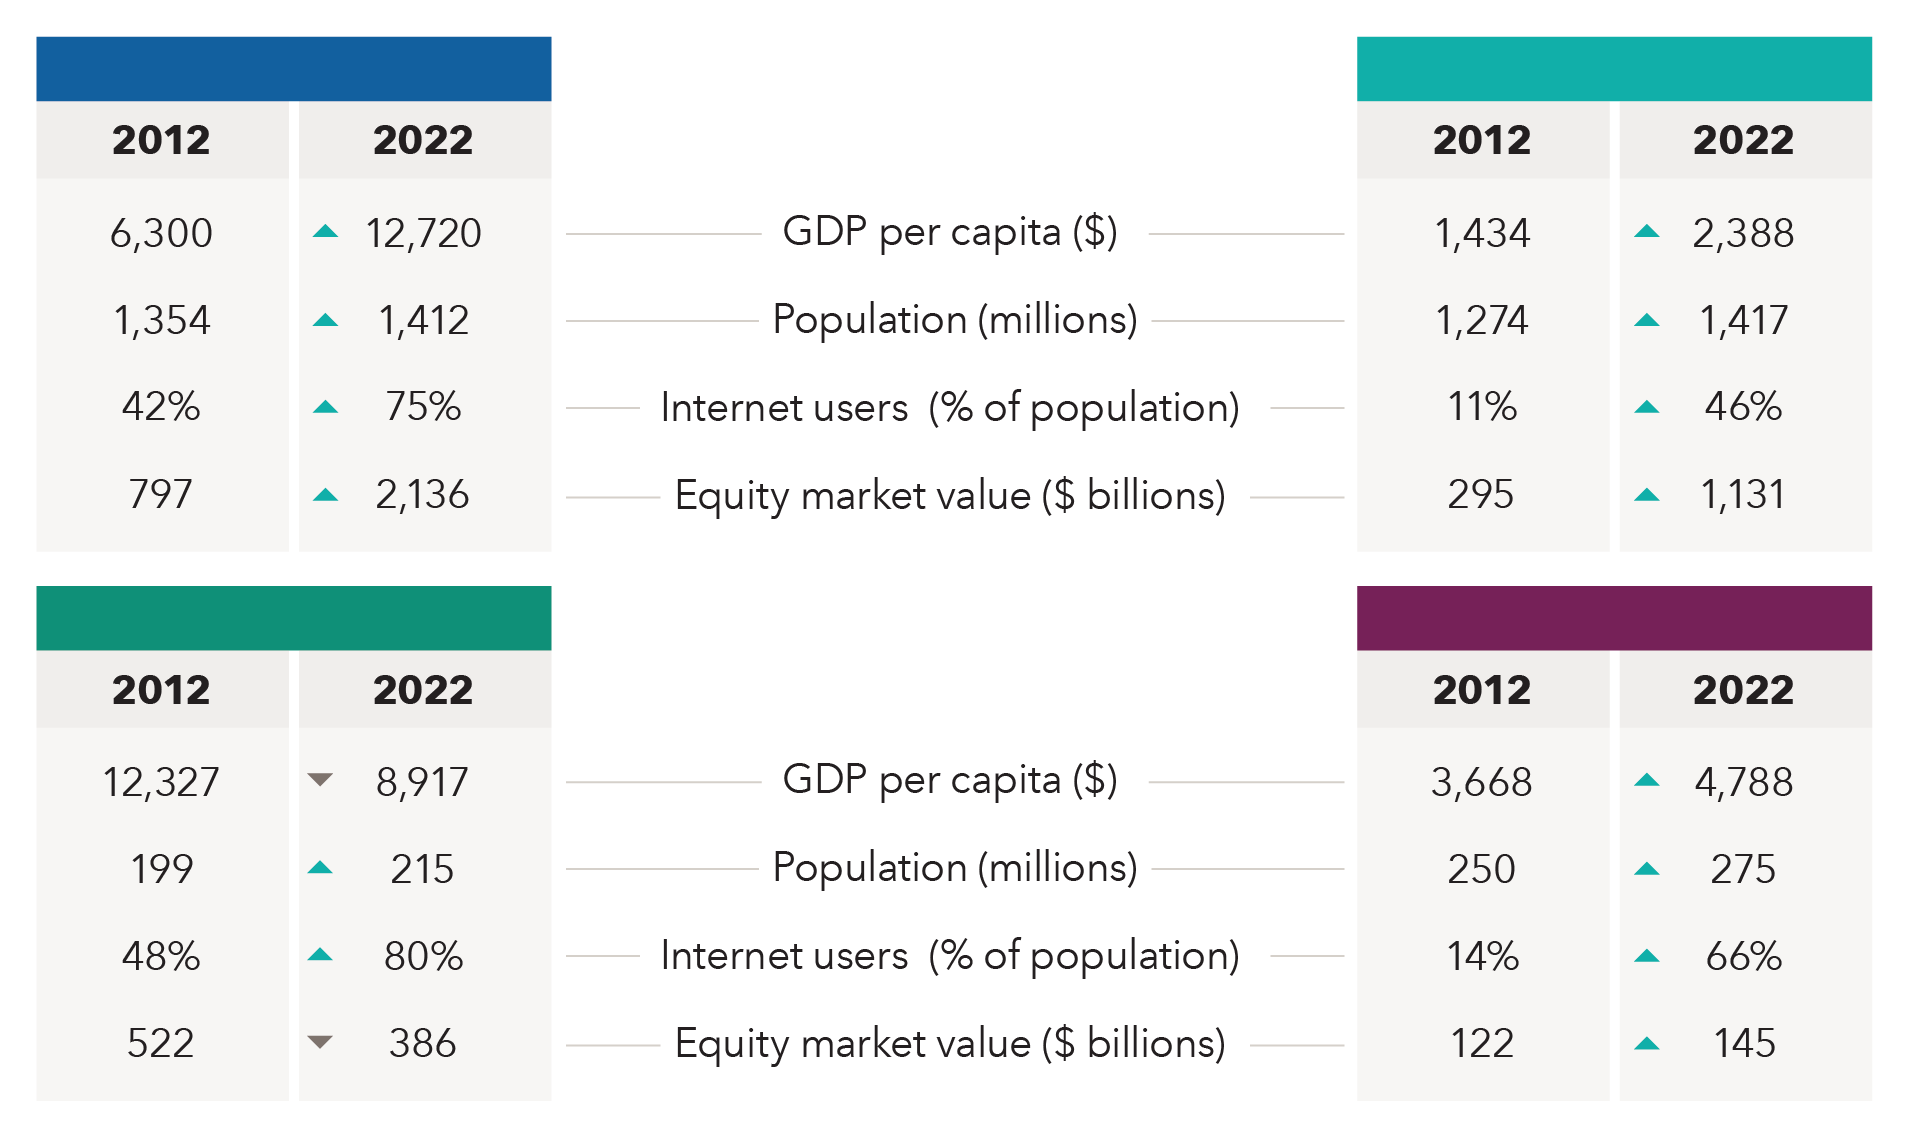 Table shows statistics on emerging markets. China’s GDP per capita was $6,300 in 2012 and $12,720 in 2022. India’s GDP per capita was $1,434 in 2012 and $2,388 in 2022. Brazil’s GDP per capita was $12,327 in 2012 and $8,917 in 2022. Indonesia’s GDP per capita was $3,668 in 2012 and $4,788 in 2022. China's population was 1.3 billion in 2012 and 1.4 billion in 2022. India's population was 1.2 billion in 2012 and 1.4 billion in 2022. Brazil's population was 199 million in 2012 and 215 million in 2022. Indonesia's population was 250 million in 2012 and 275 million in 2022. Internet users in China were 42% of the population in 2012 and 75% in 2022. Internet users in India were 11% of the population in 2012 and 46% in 2021. Internet users in Brazil were 48% of the population in 2012 and 80% in 2022. Internet users in Indonesia were 14% of the population in 2012 and 66% in 2022. Equity market value of the MSCI China Index was $797 billion in 2012 and $2.1 trillion in 2022. Equity market value of MSCI India Index was $295 billion in 2012 and $1.1 trillion in 2022. Equity market value of MSCI Brazil Index was $522 billion in 2012 and $386 billion in 2022. Equity market value of MSCI Indonesia Index was $122 billion in 2012 and $145 billion in 2022.